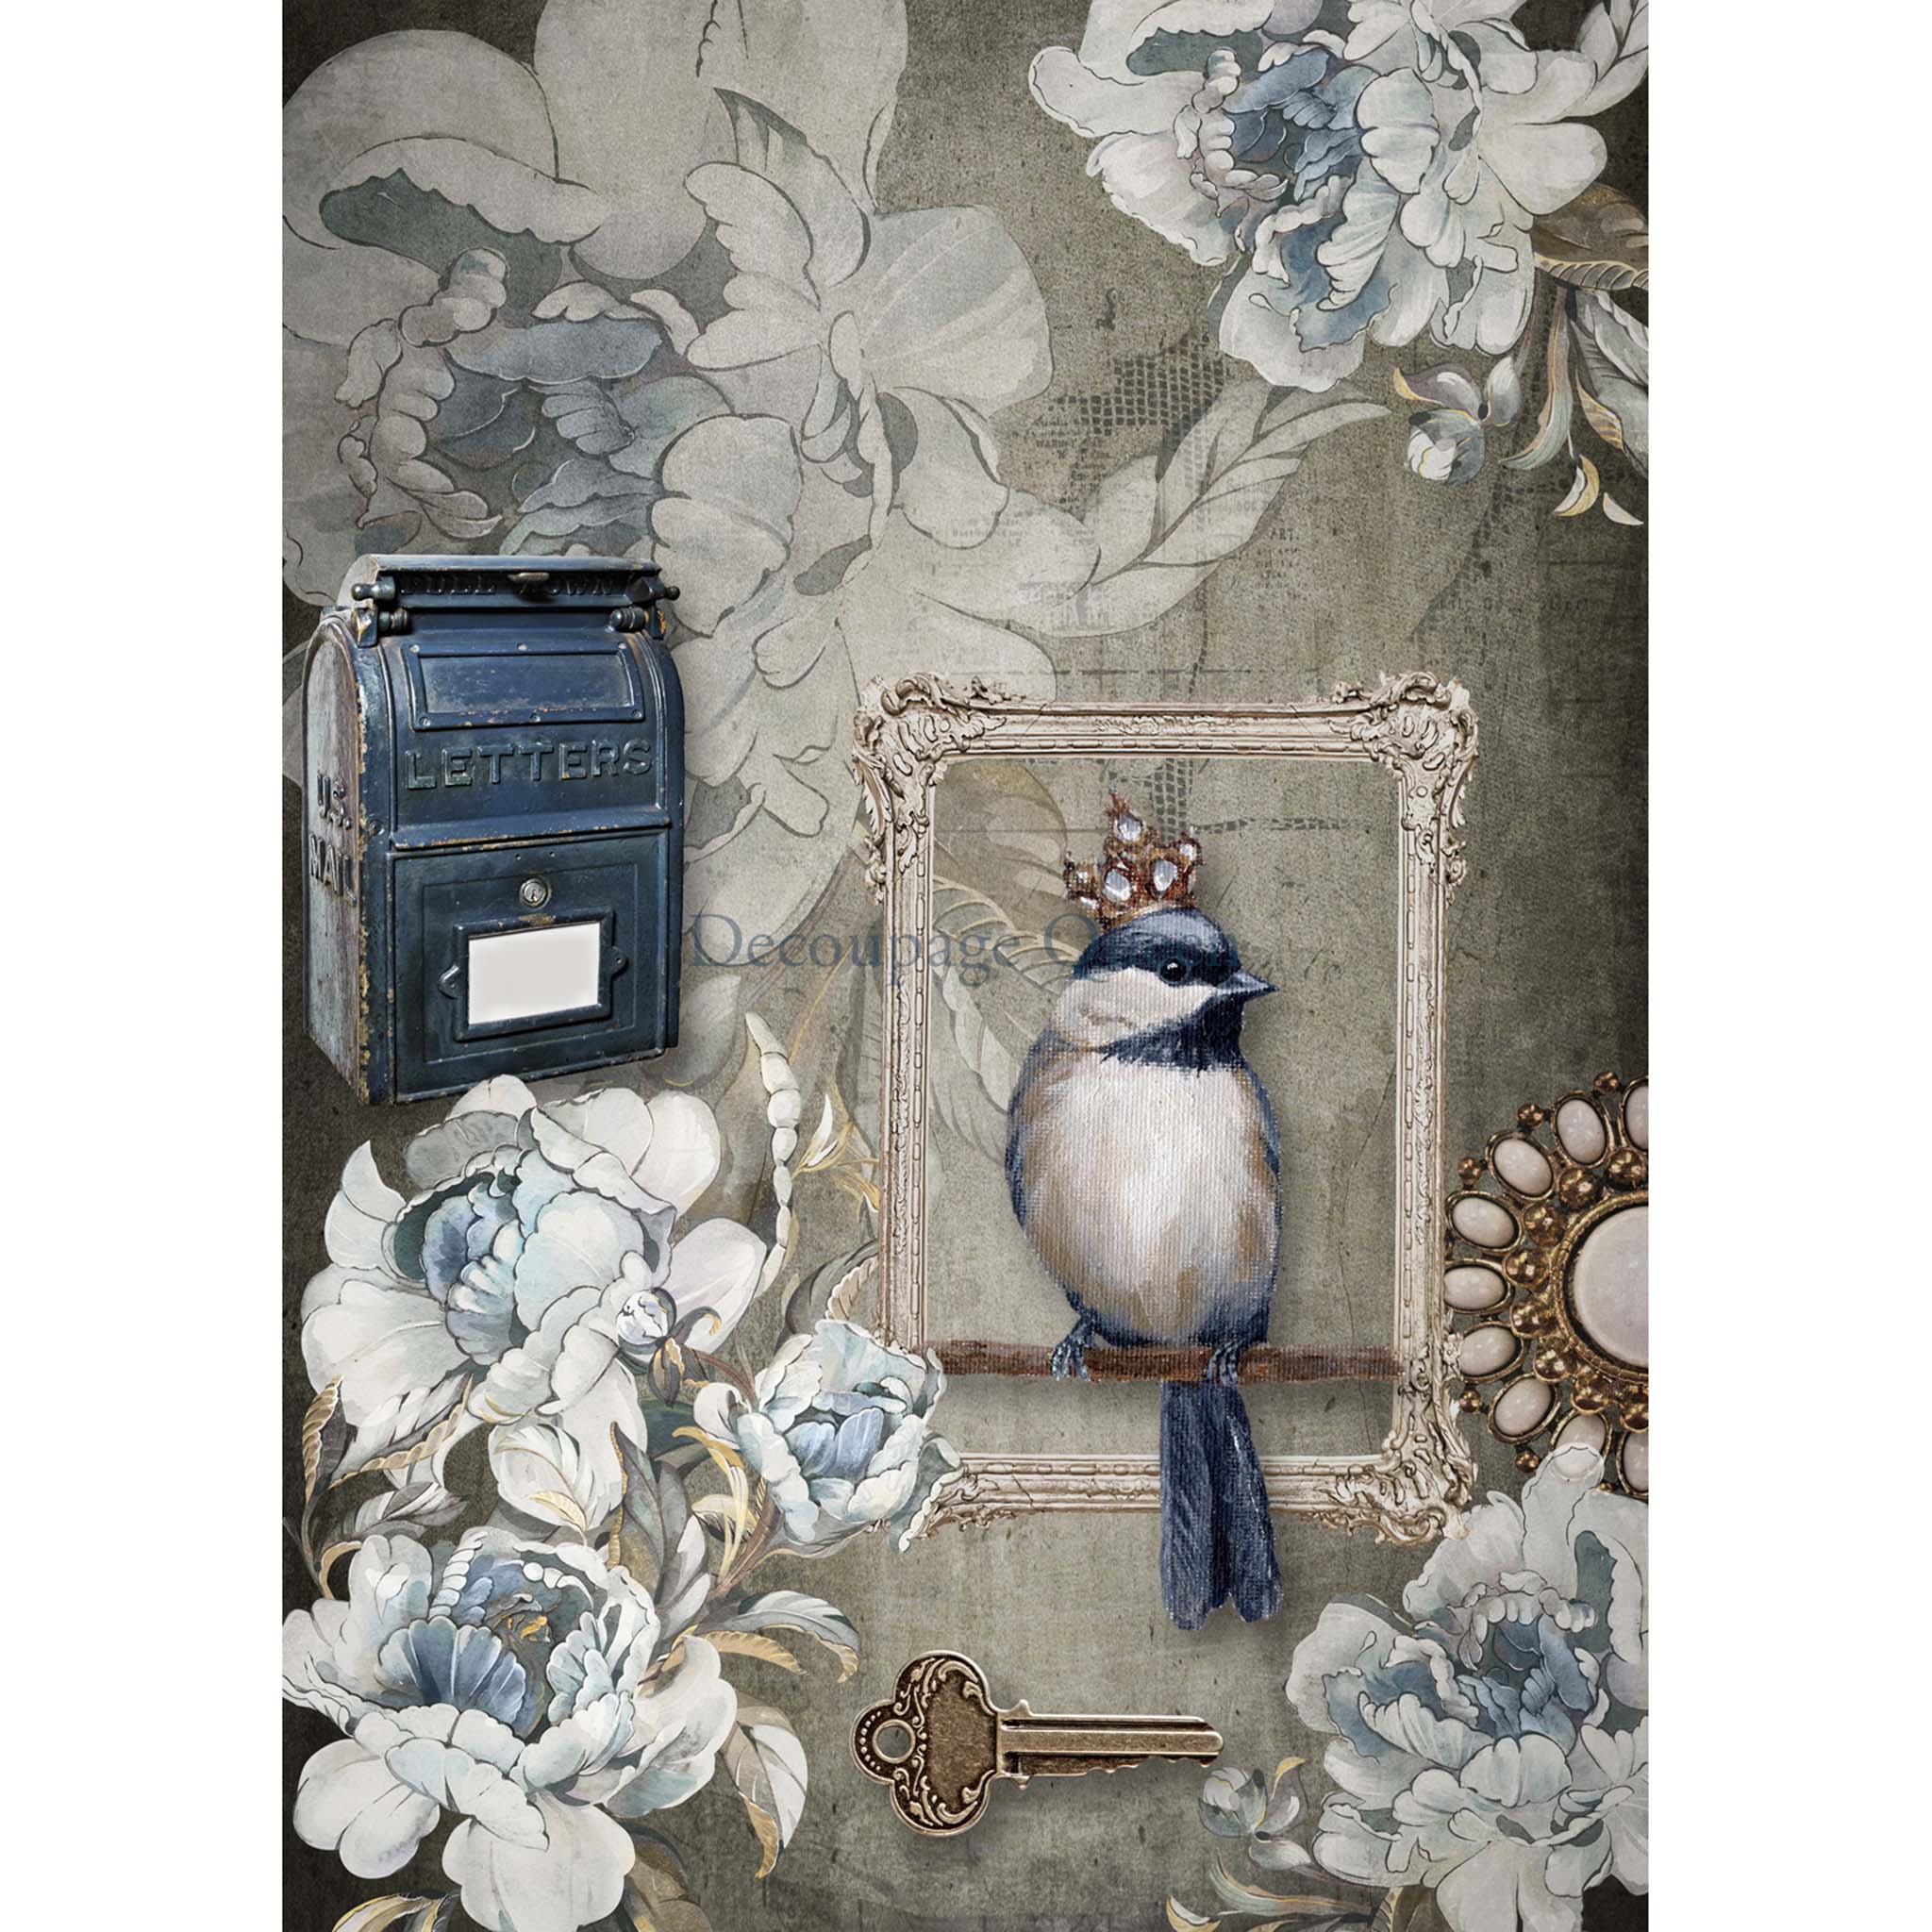 A1 rice paper design that features a distressed background behind a nostalgic mailbox, delicate flowers in white and blue, and a regal bird in a picture frame. White borders are on the sides.